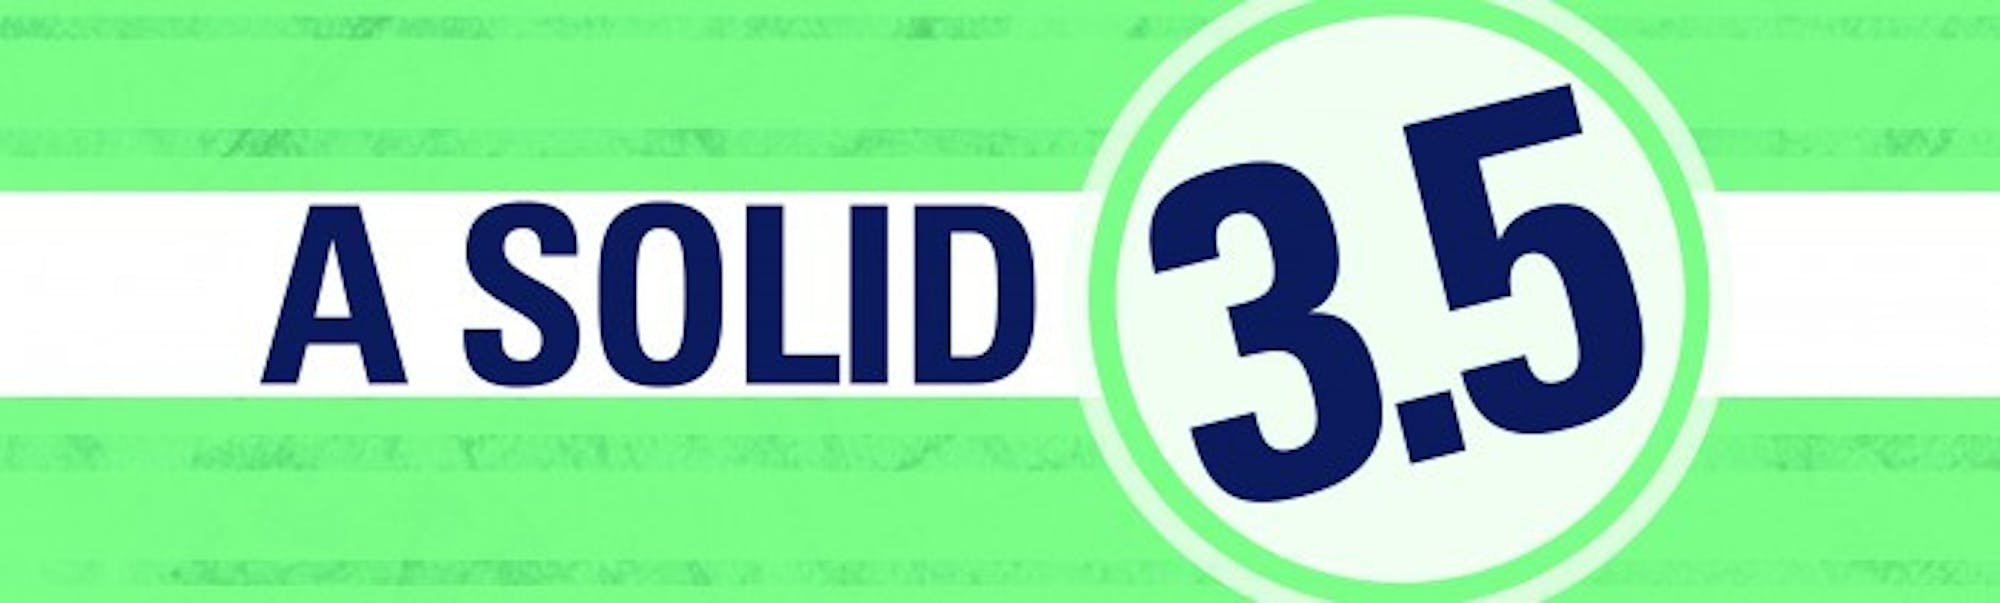 WEB_Banner_Solid35